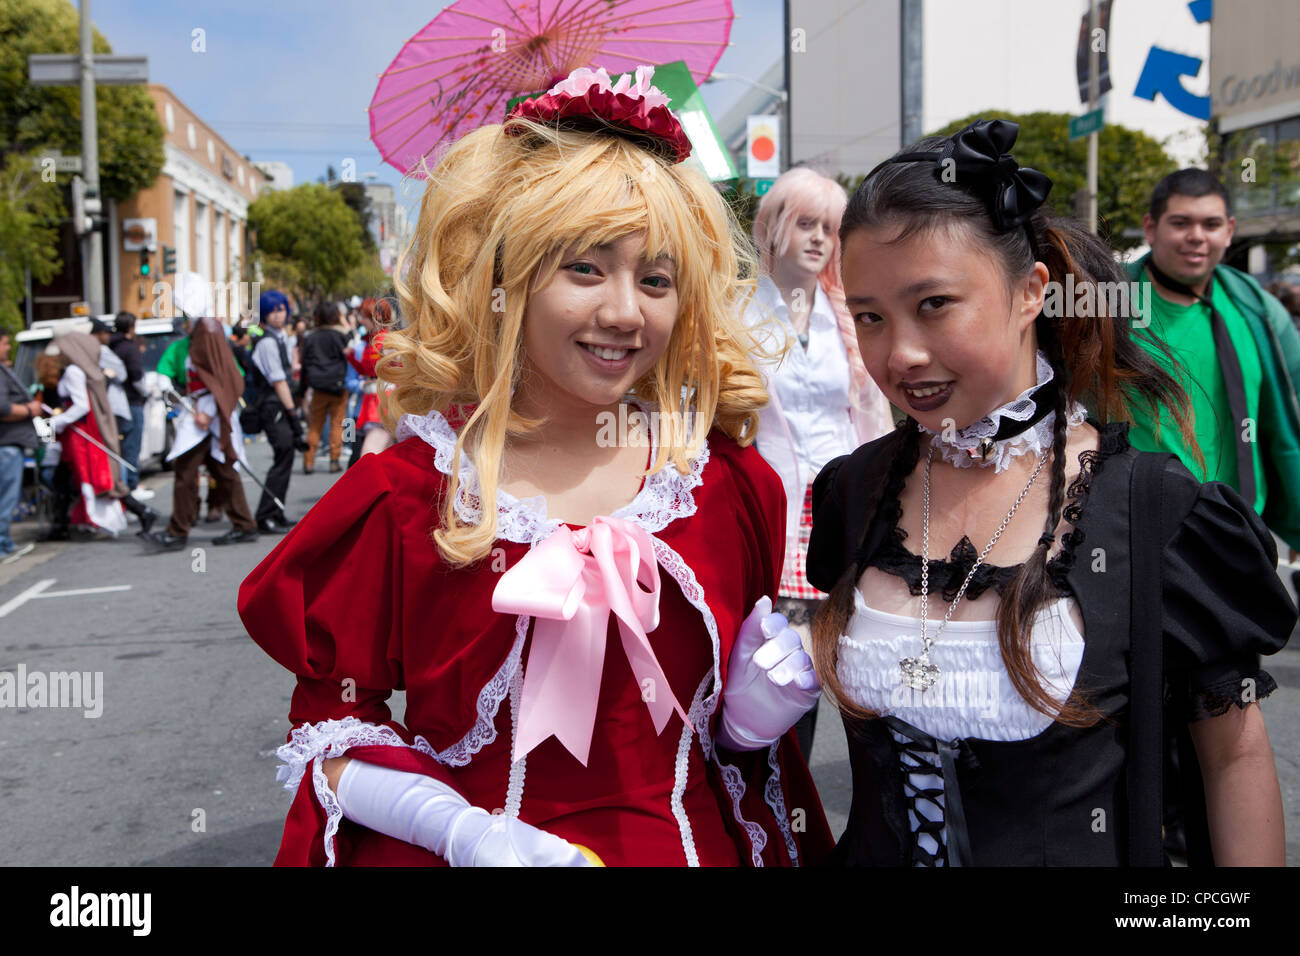 Young Asian women dressed as anime characters - San Francisco, California USA Stock Photo